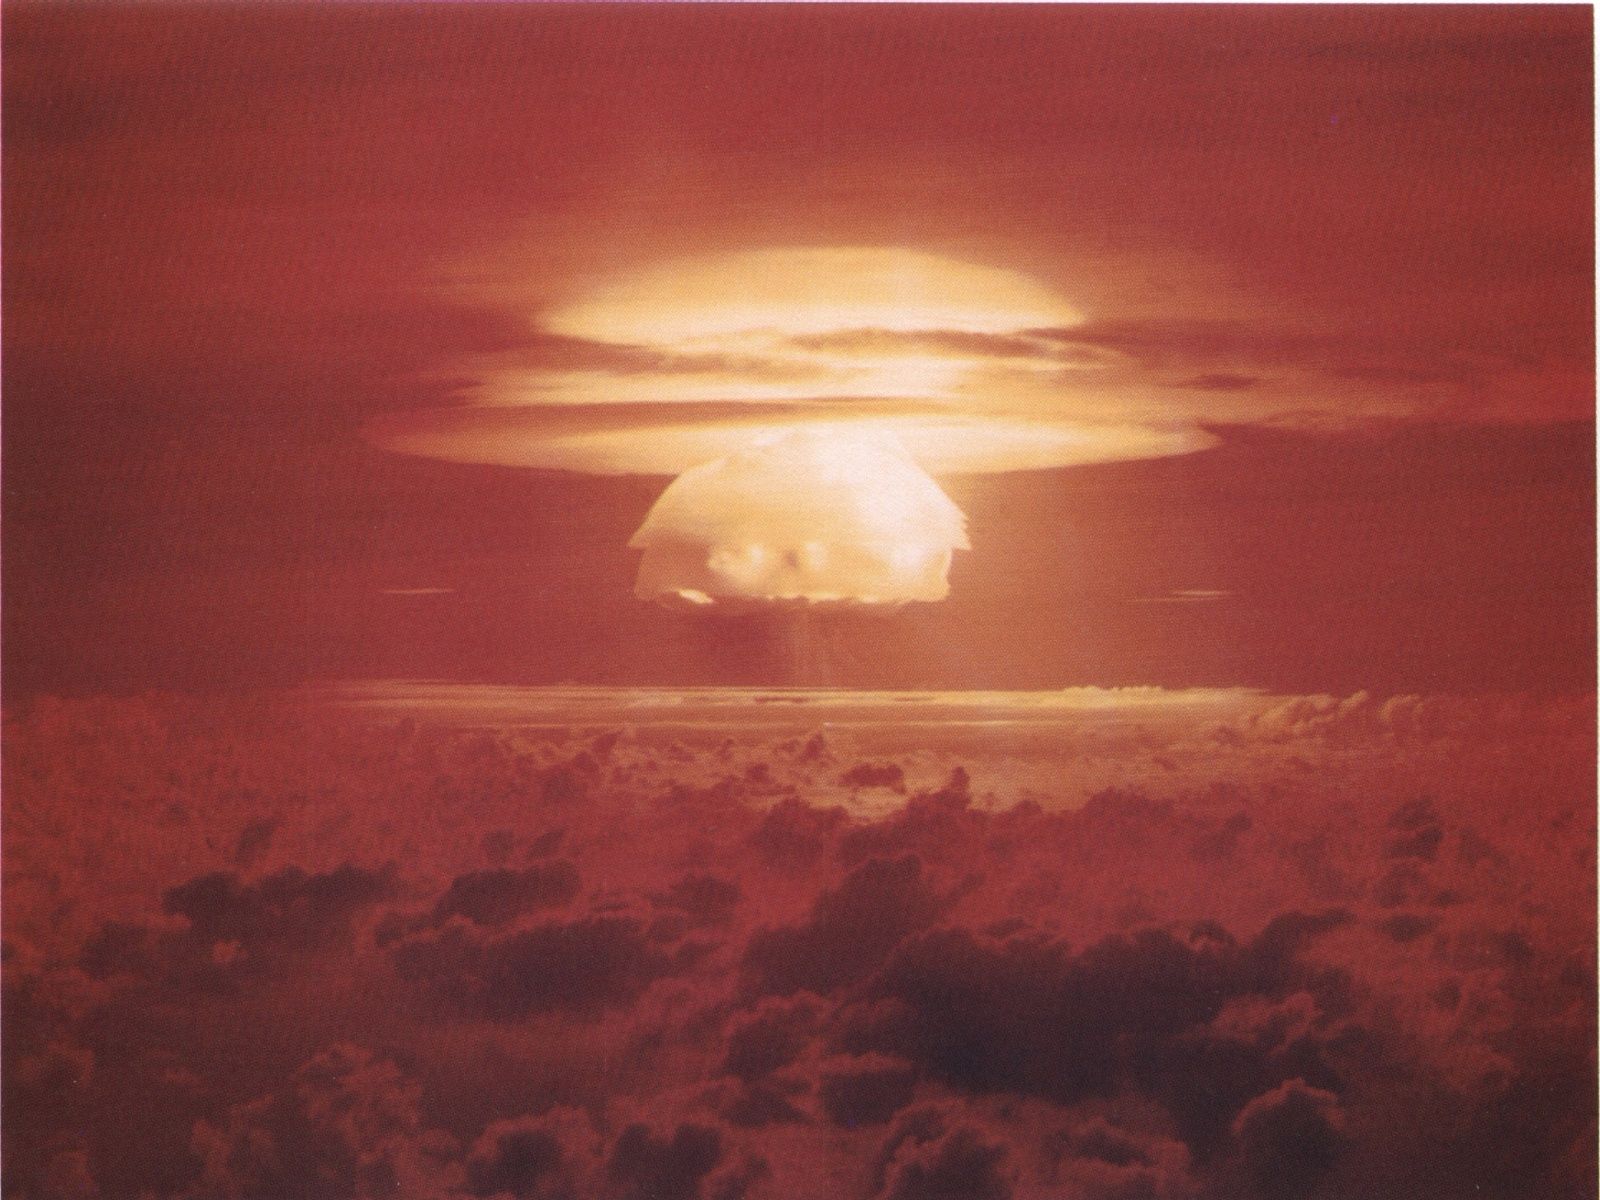 The mushroom cloud from a 1954 high-yield thermonuclear weapon test.